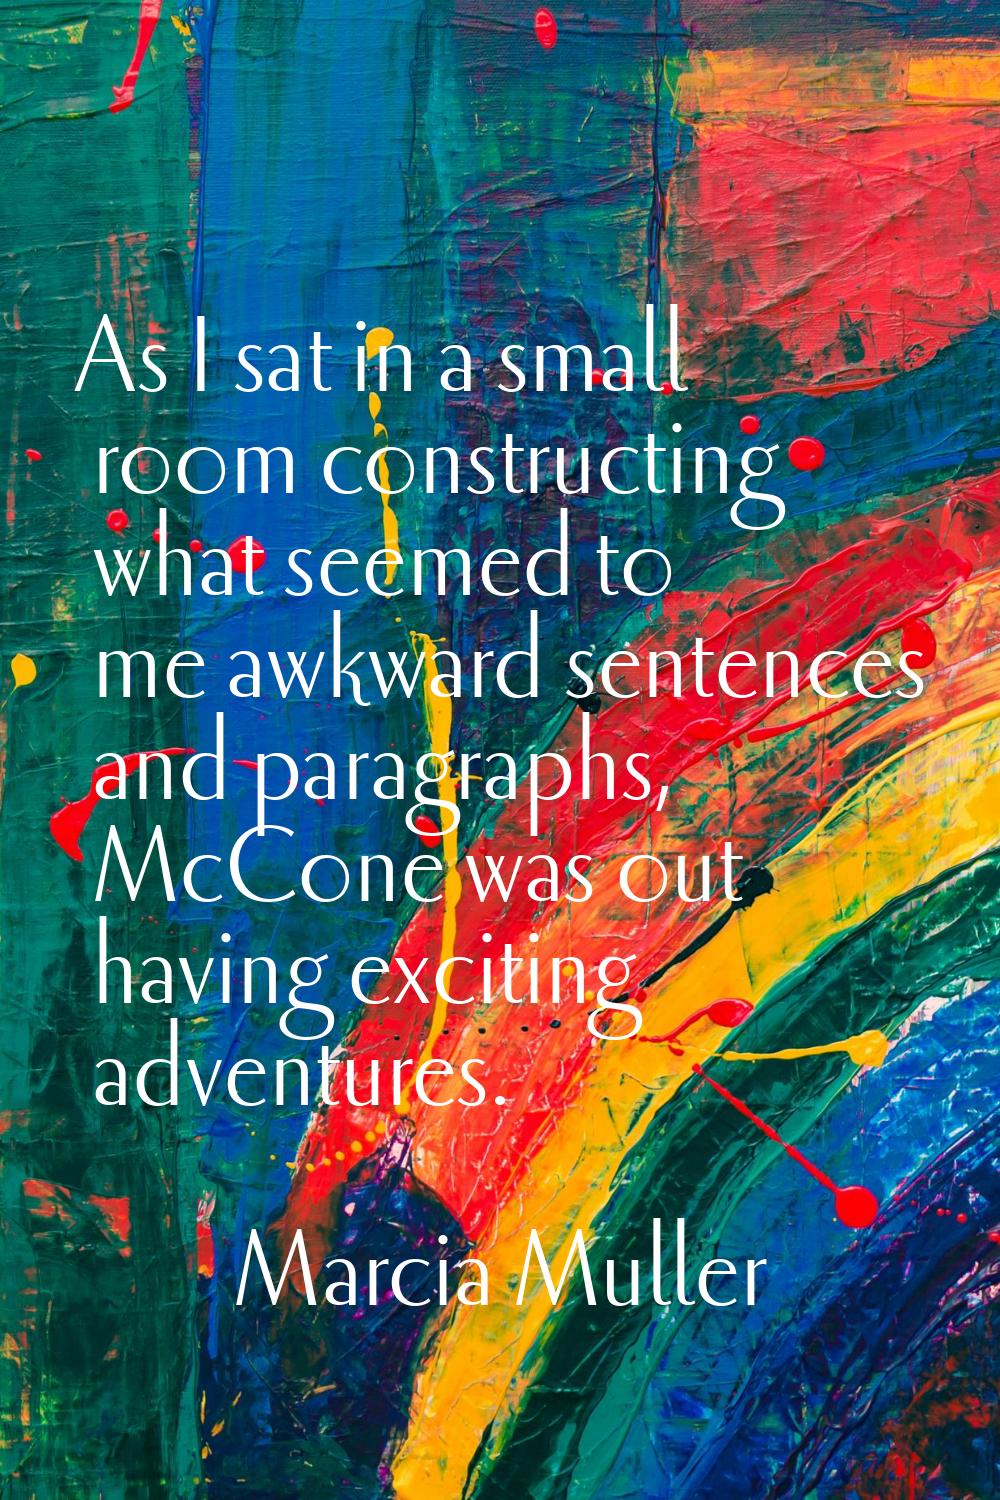 As I sat in a small room constructing what seemed to me awkward sentences and paragraphs, McCone wa